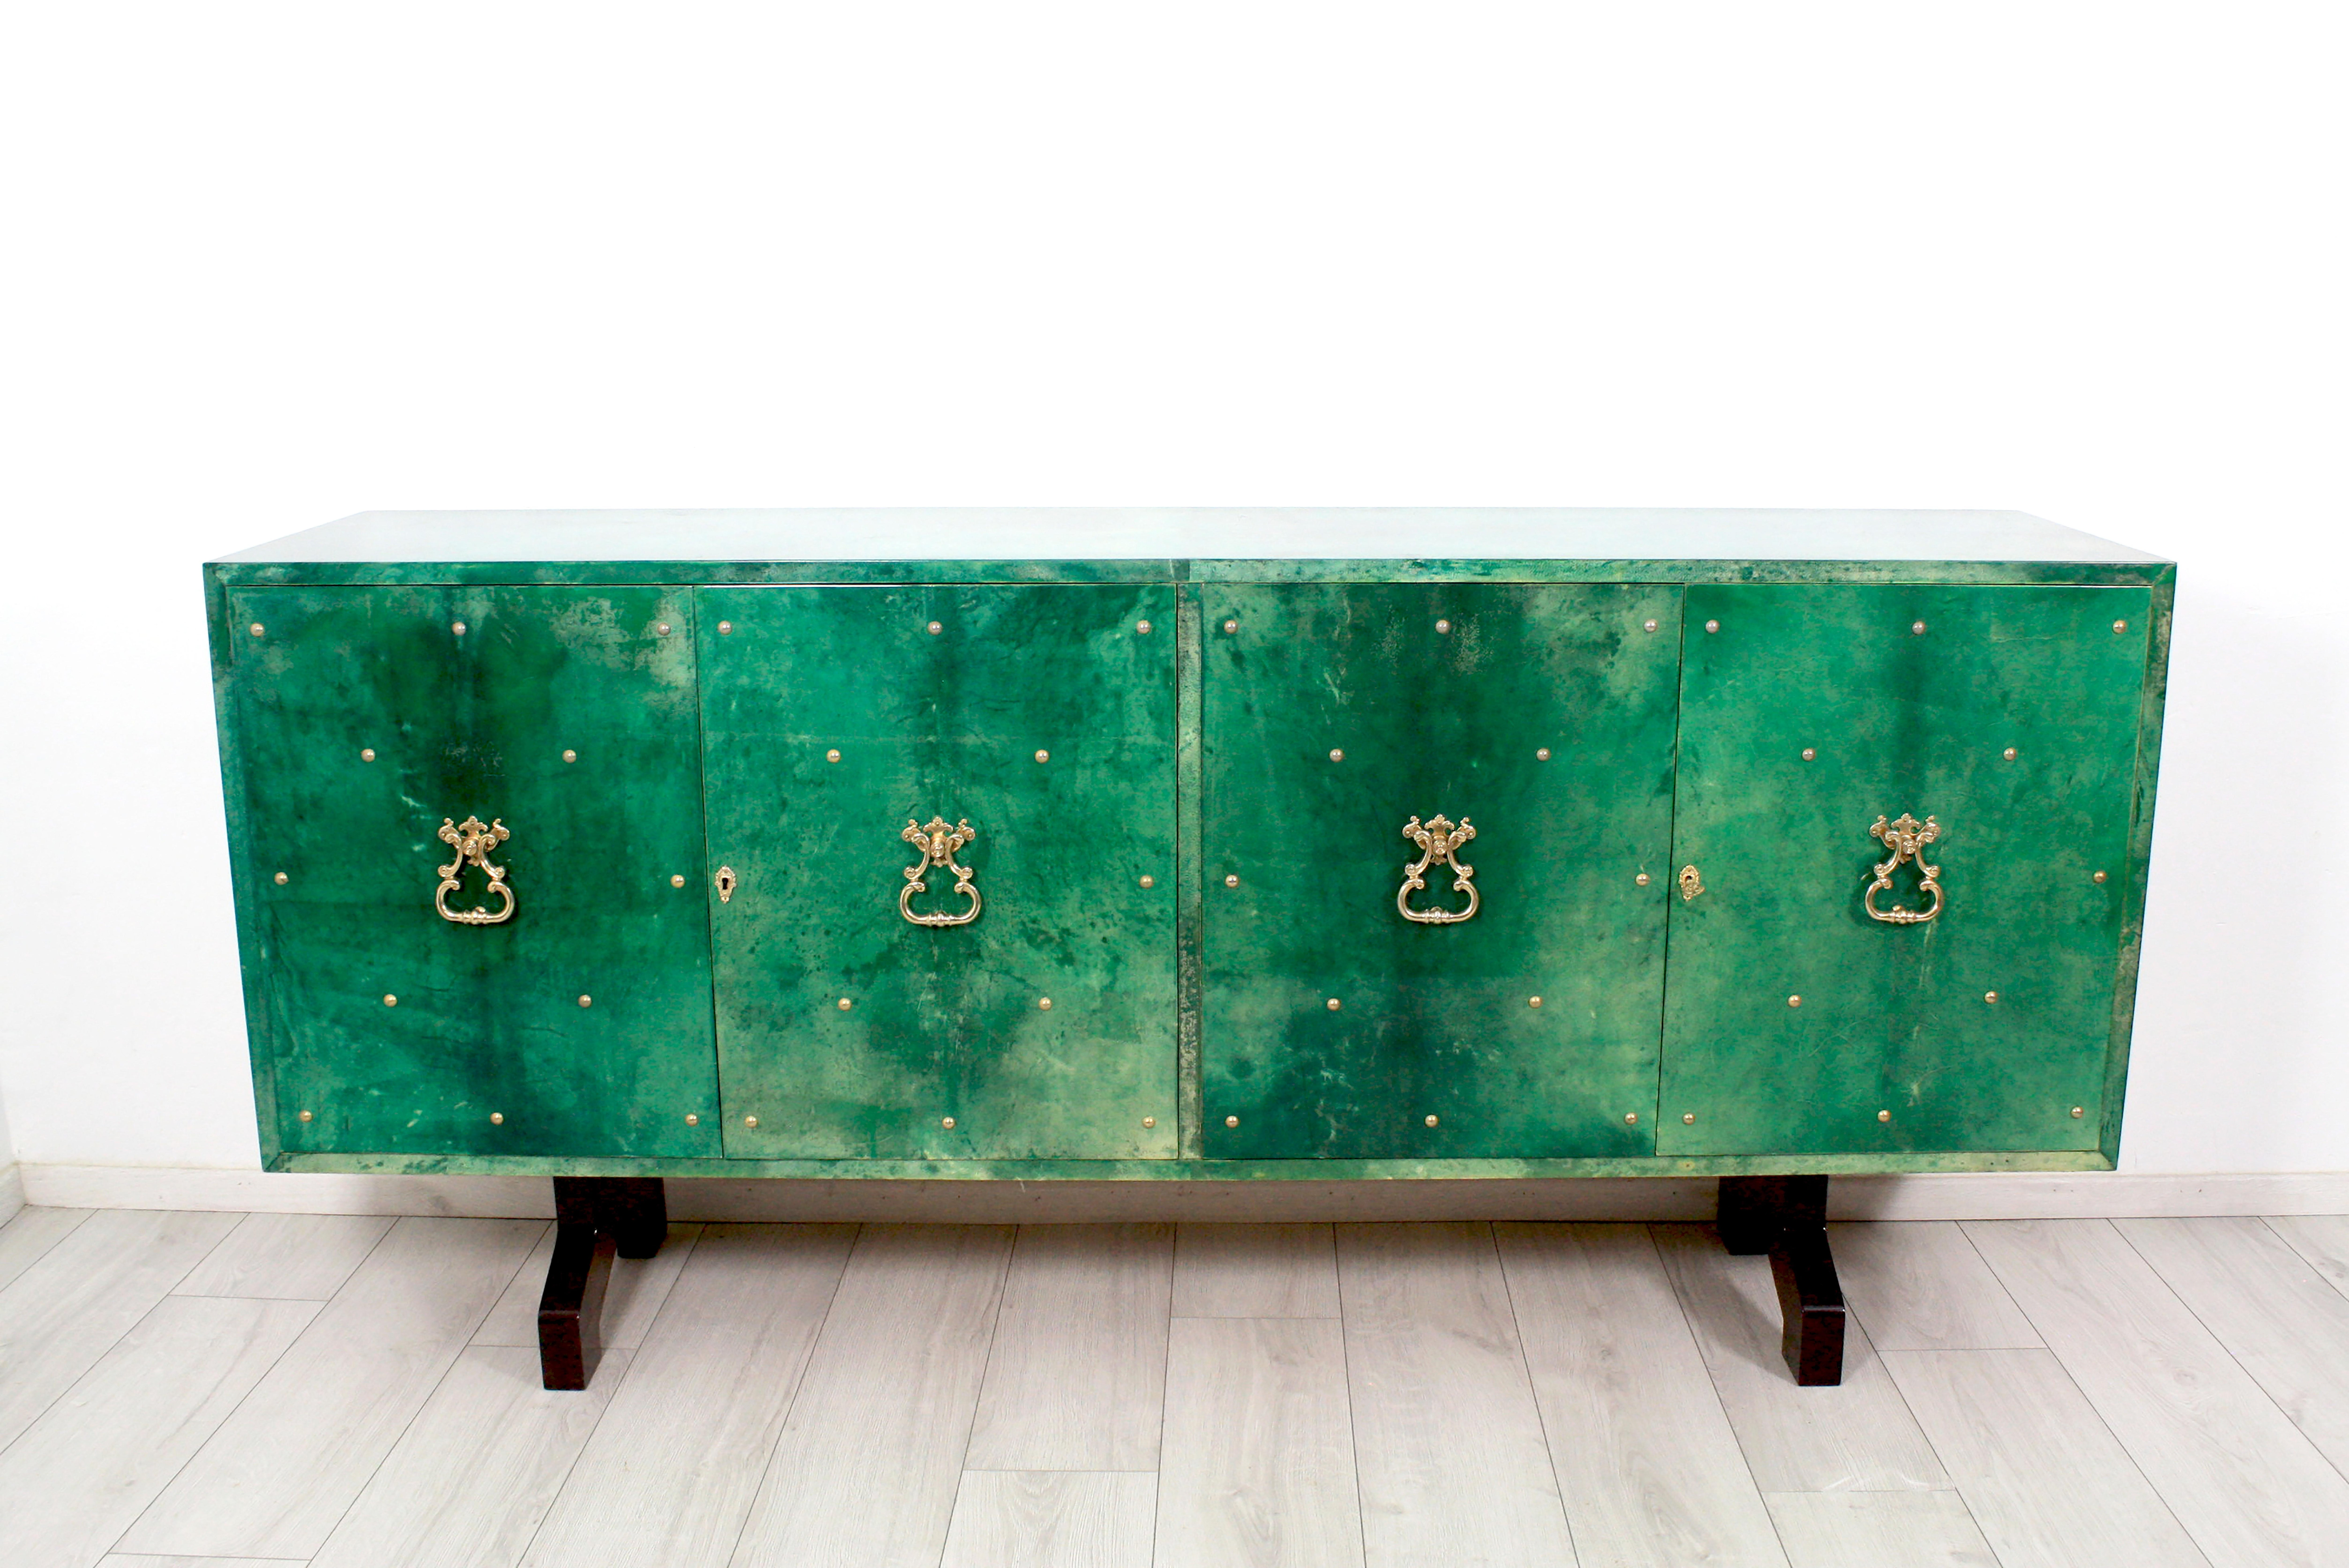 Unique lacquered emerald green goatskin credenza, high quality brass details. Designed by Aldo Tura in the 1960s. Two glass shelves (on each side) inside on a wooden mahogany base.
  